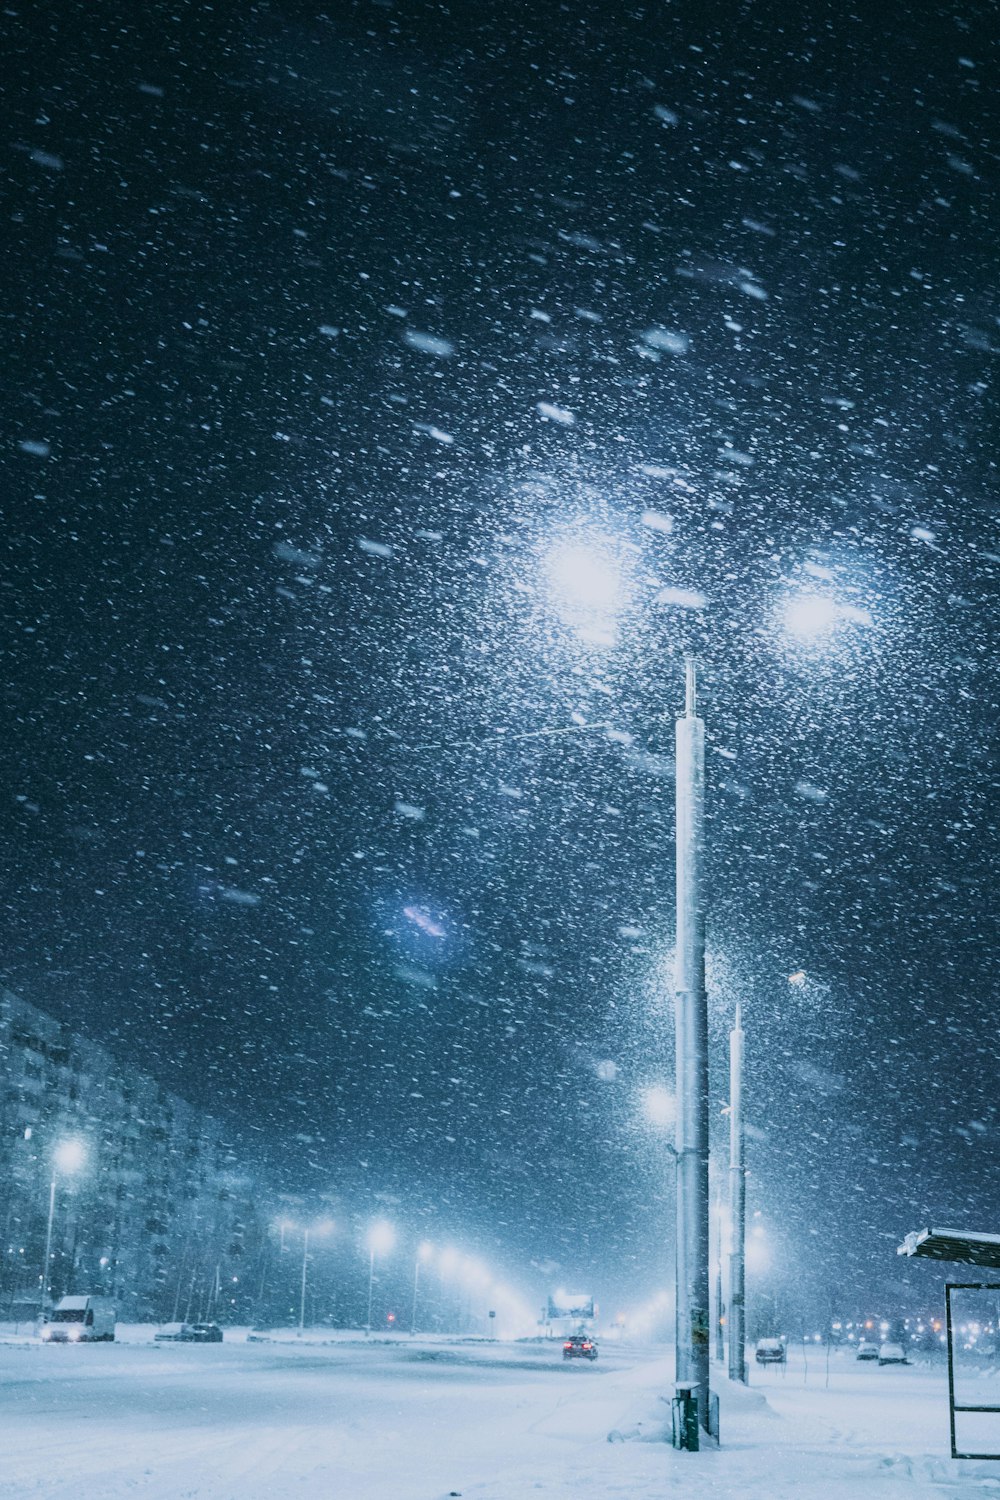 a snowy night in a city with street lights